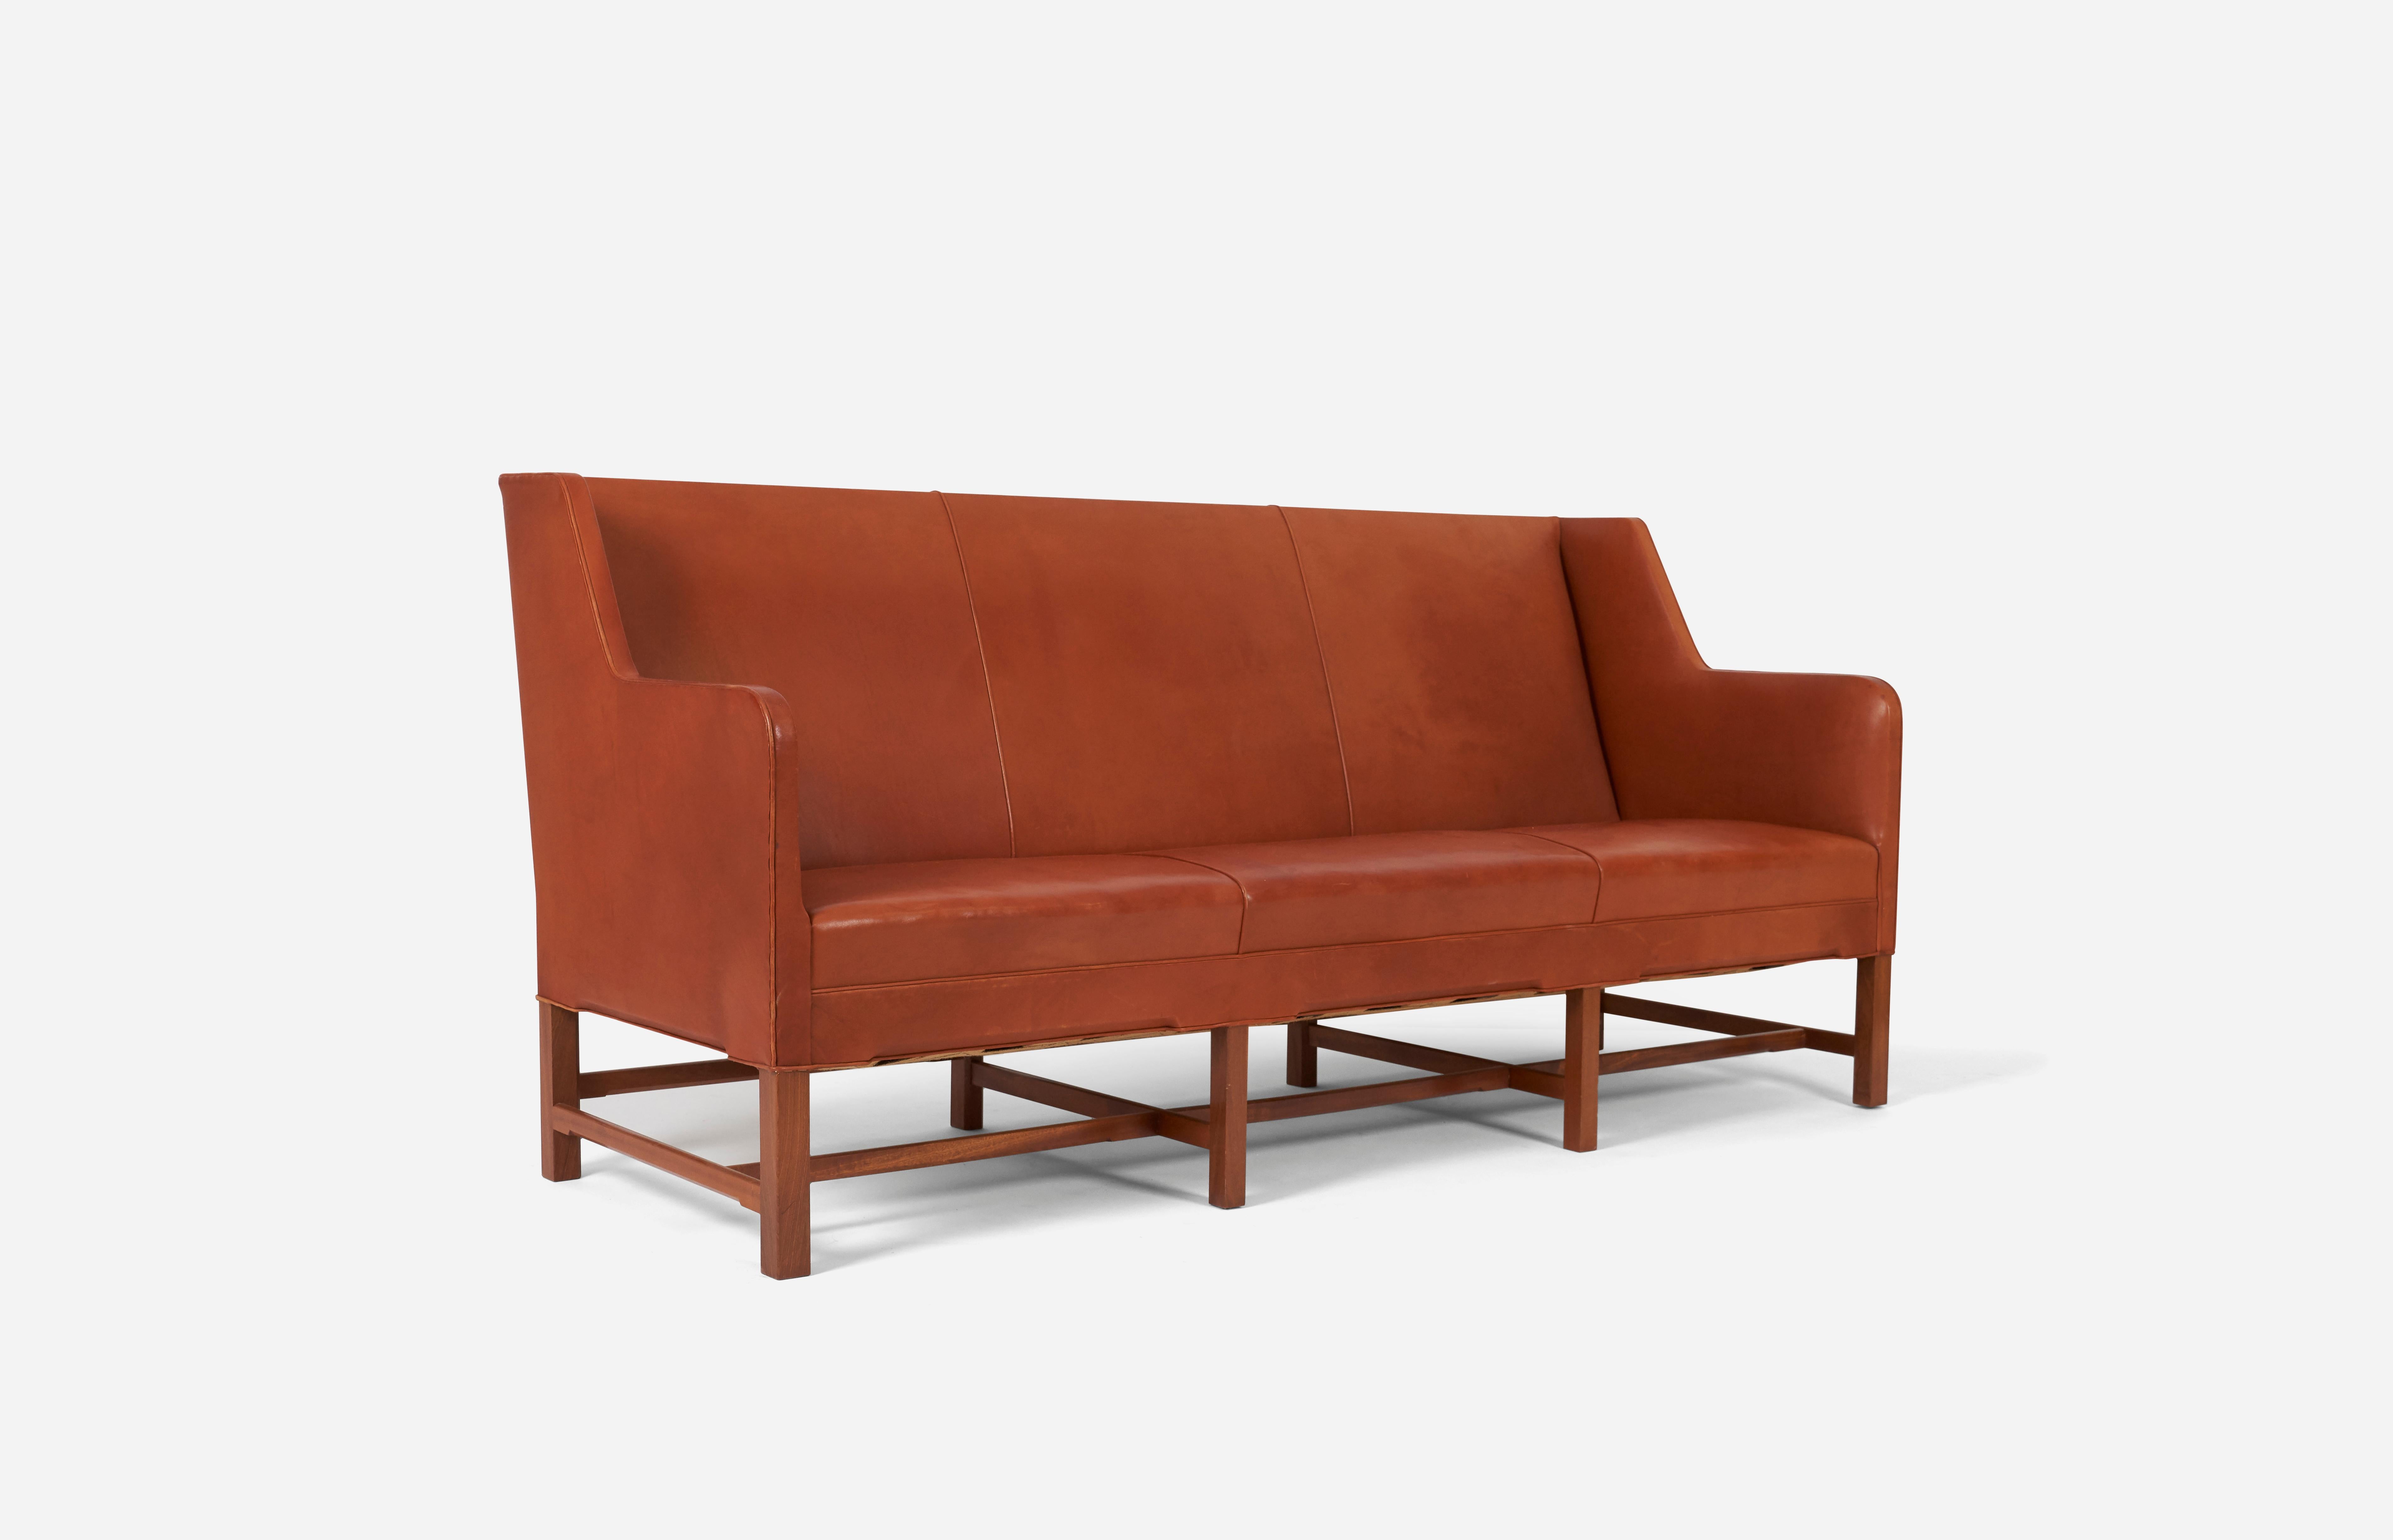 Kaare Klint sofa designed in 1935 and produced by cabinetmaker Rud Rasmussen. Sofa Model KK 5011. Original orange/red leather with mahogany frame.